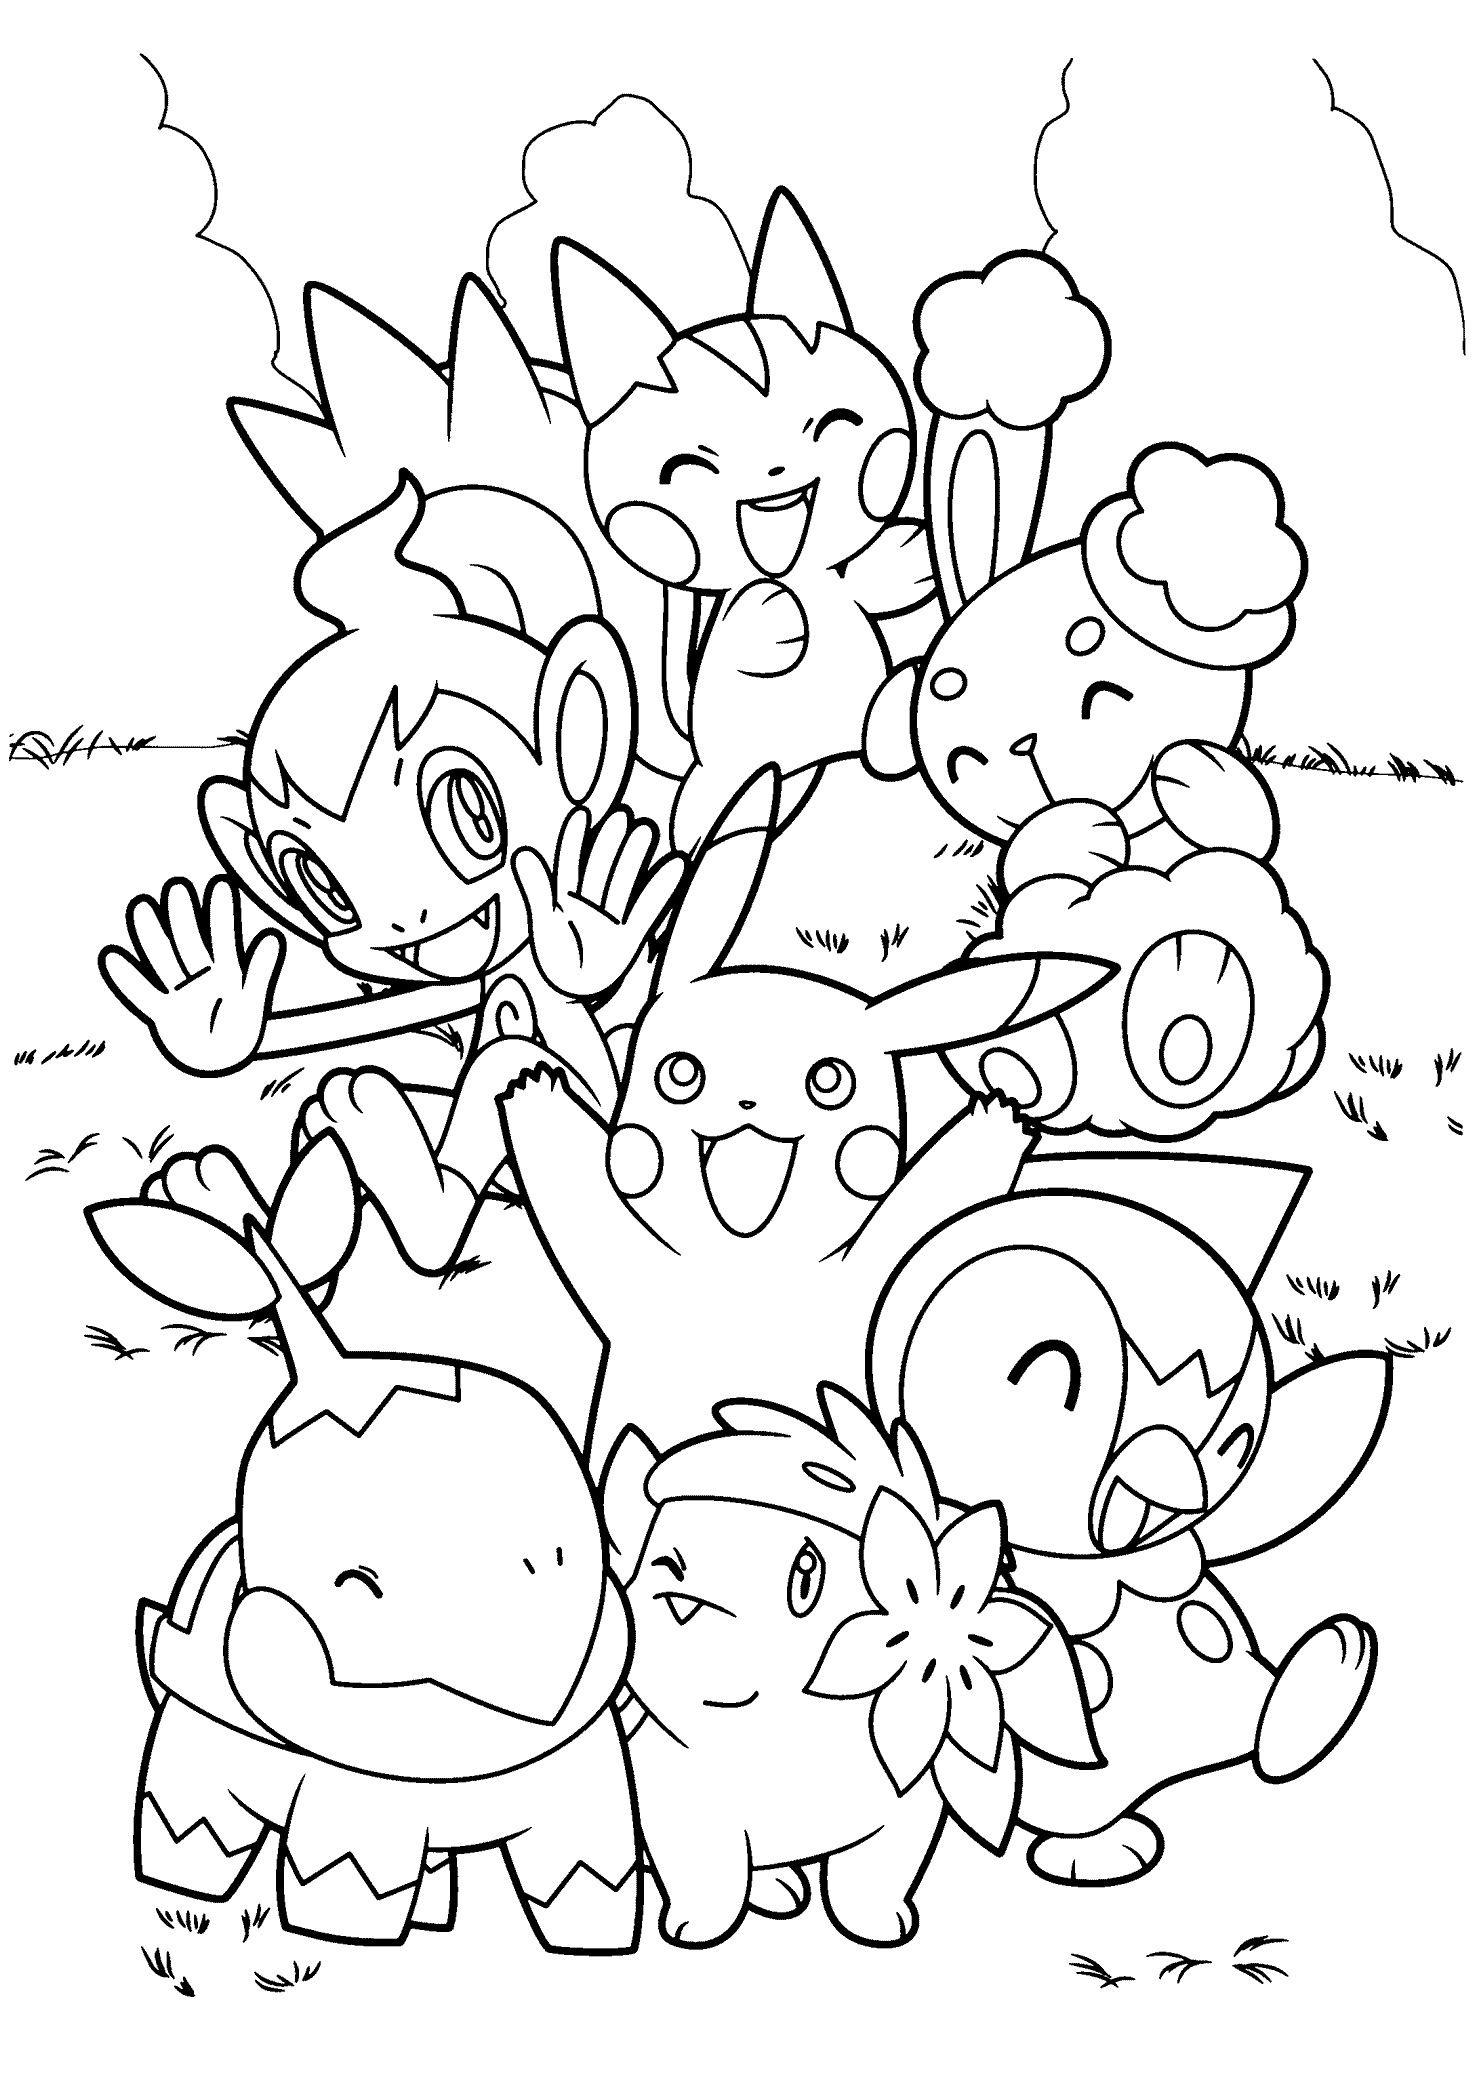 Pokemon Coloring Pages that You Can Color Online